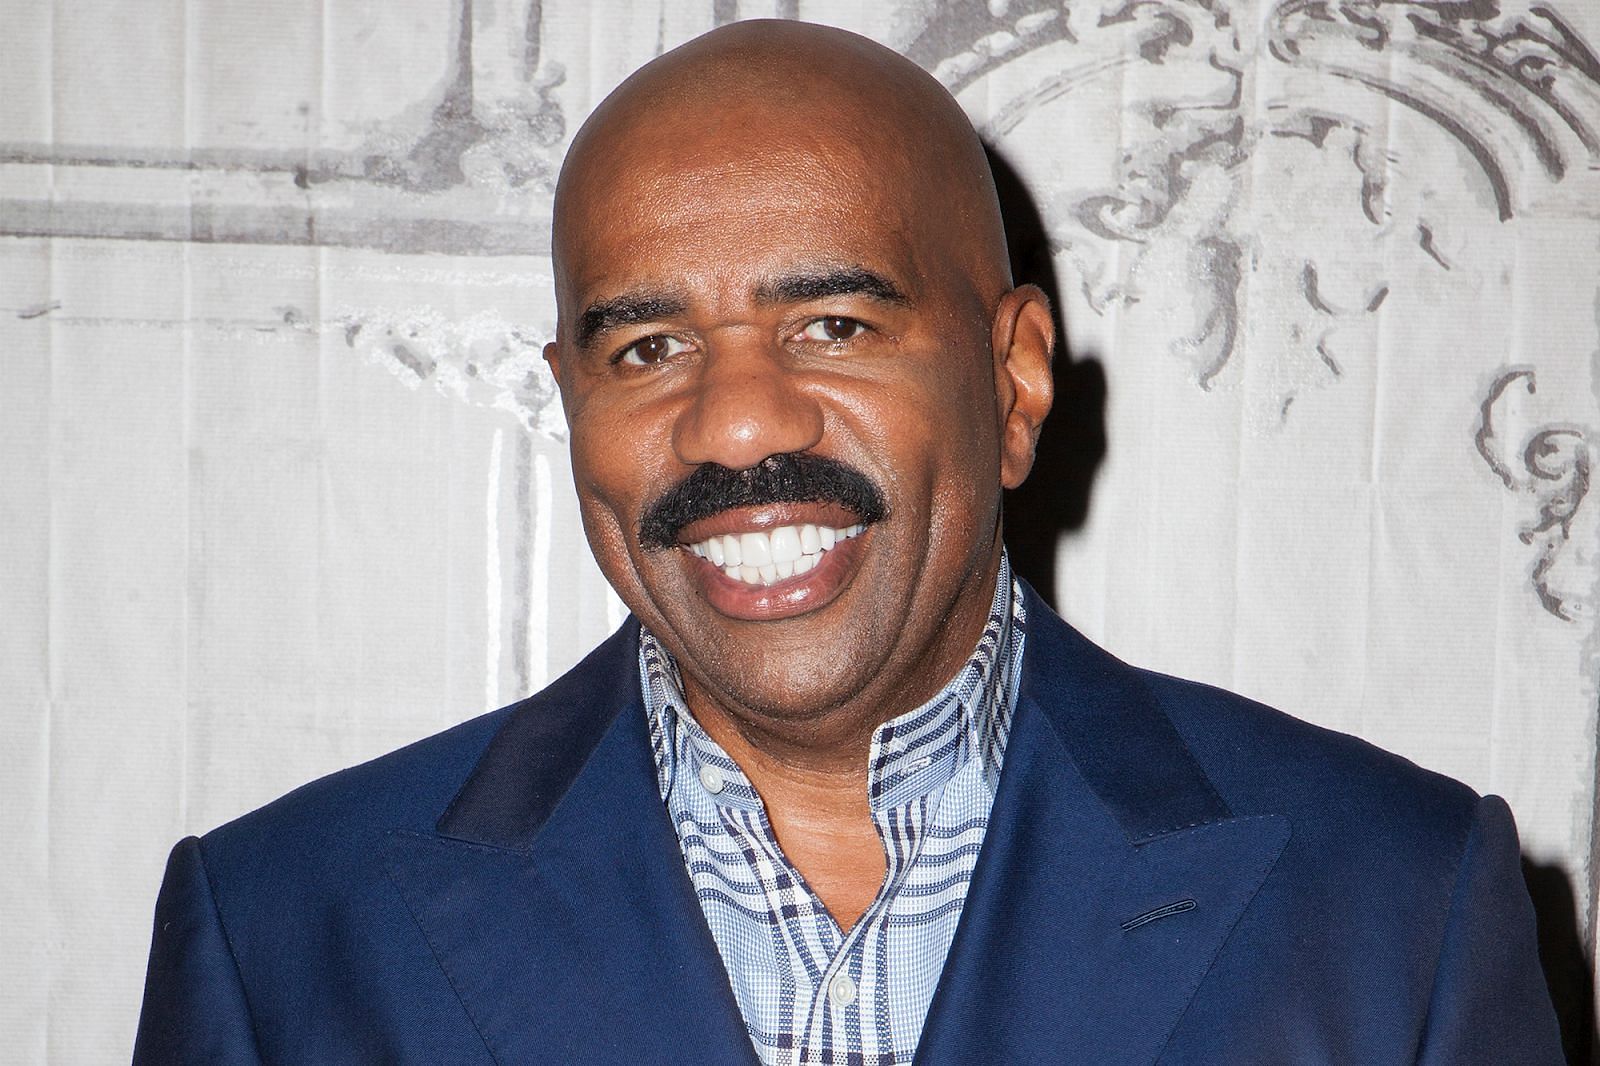 How much is Steve Harvey’s Net Worth in 2022?